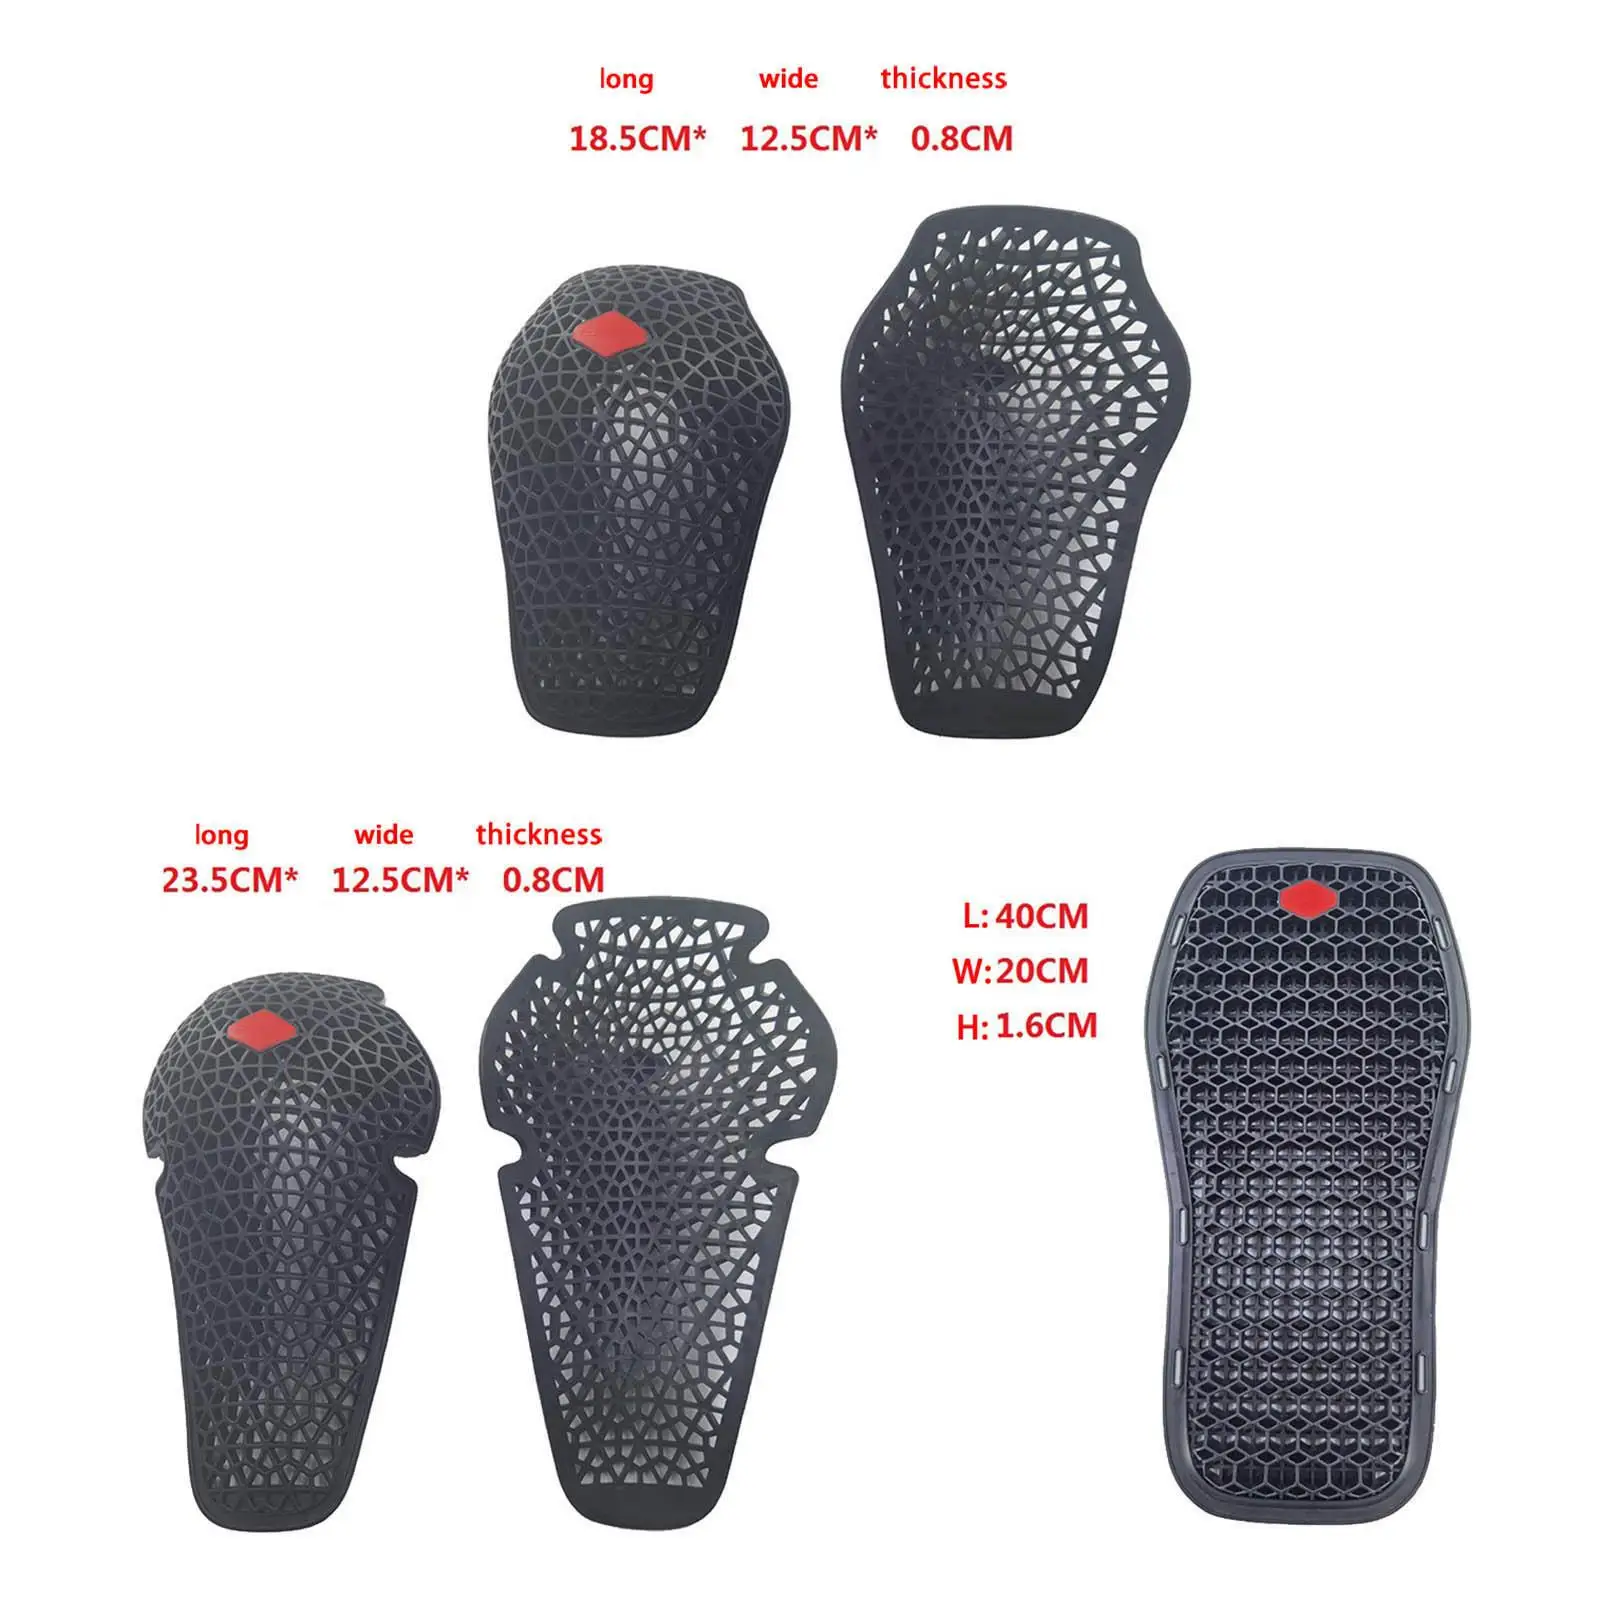 5Pcs Motorcycle Armor Protector Cycling Breathable Equipment Protector Kit